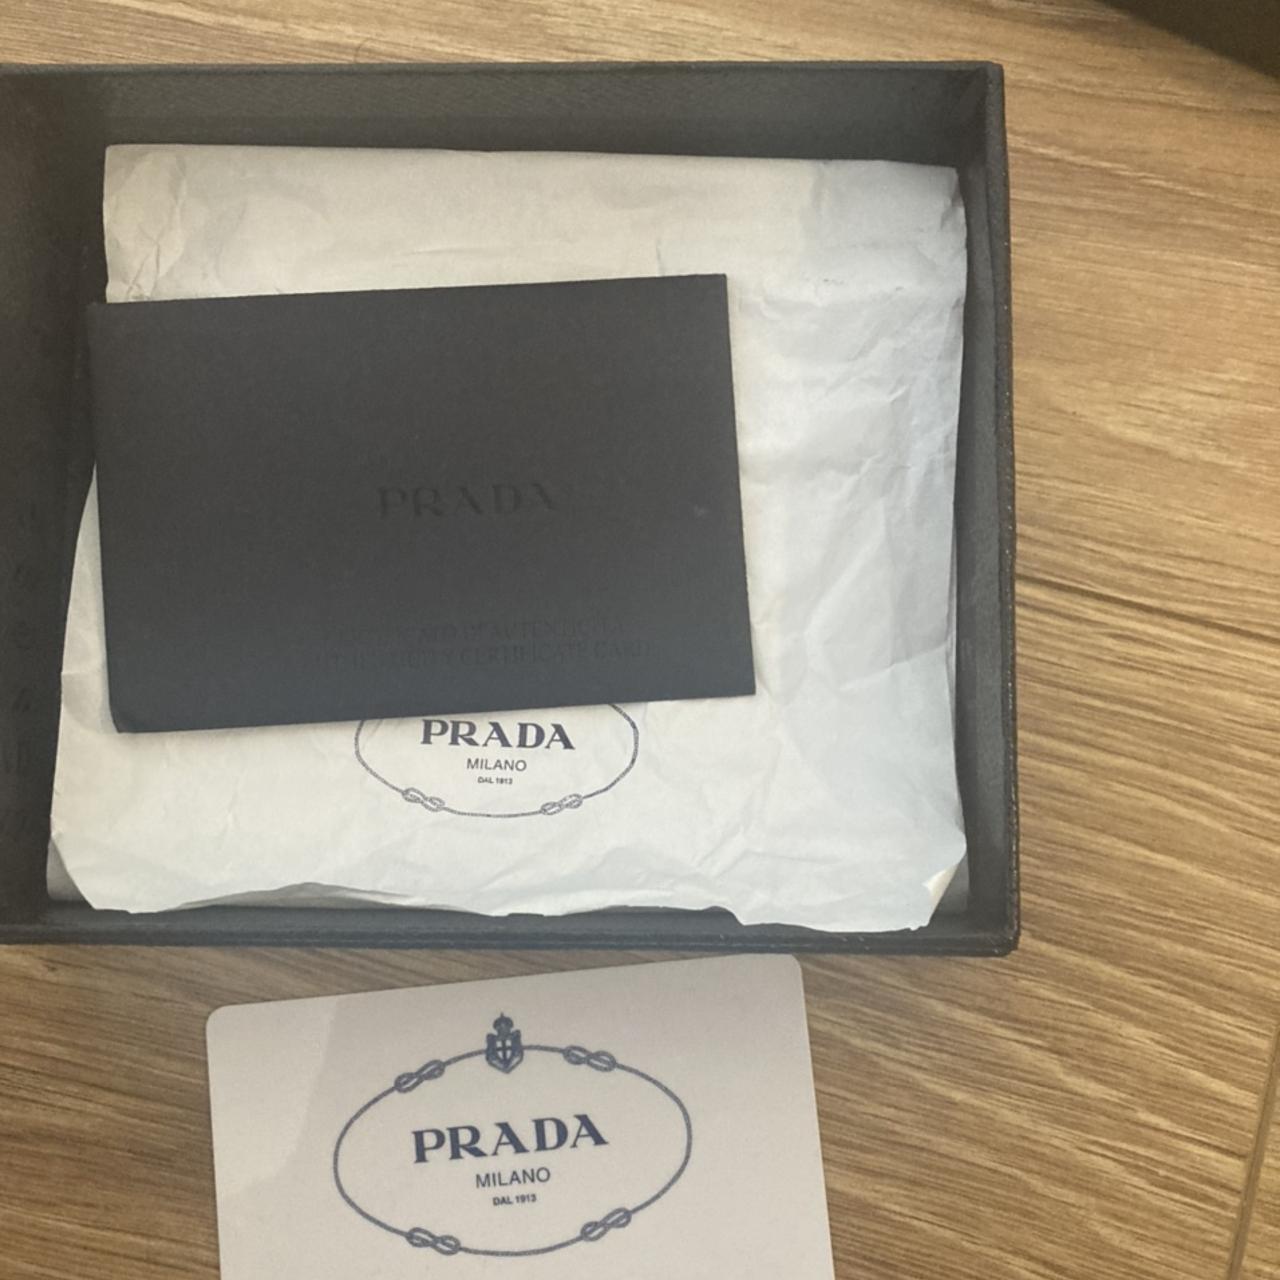 Authentic Prada Playing Cards Red & Black 36004